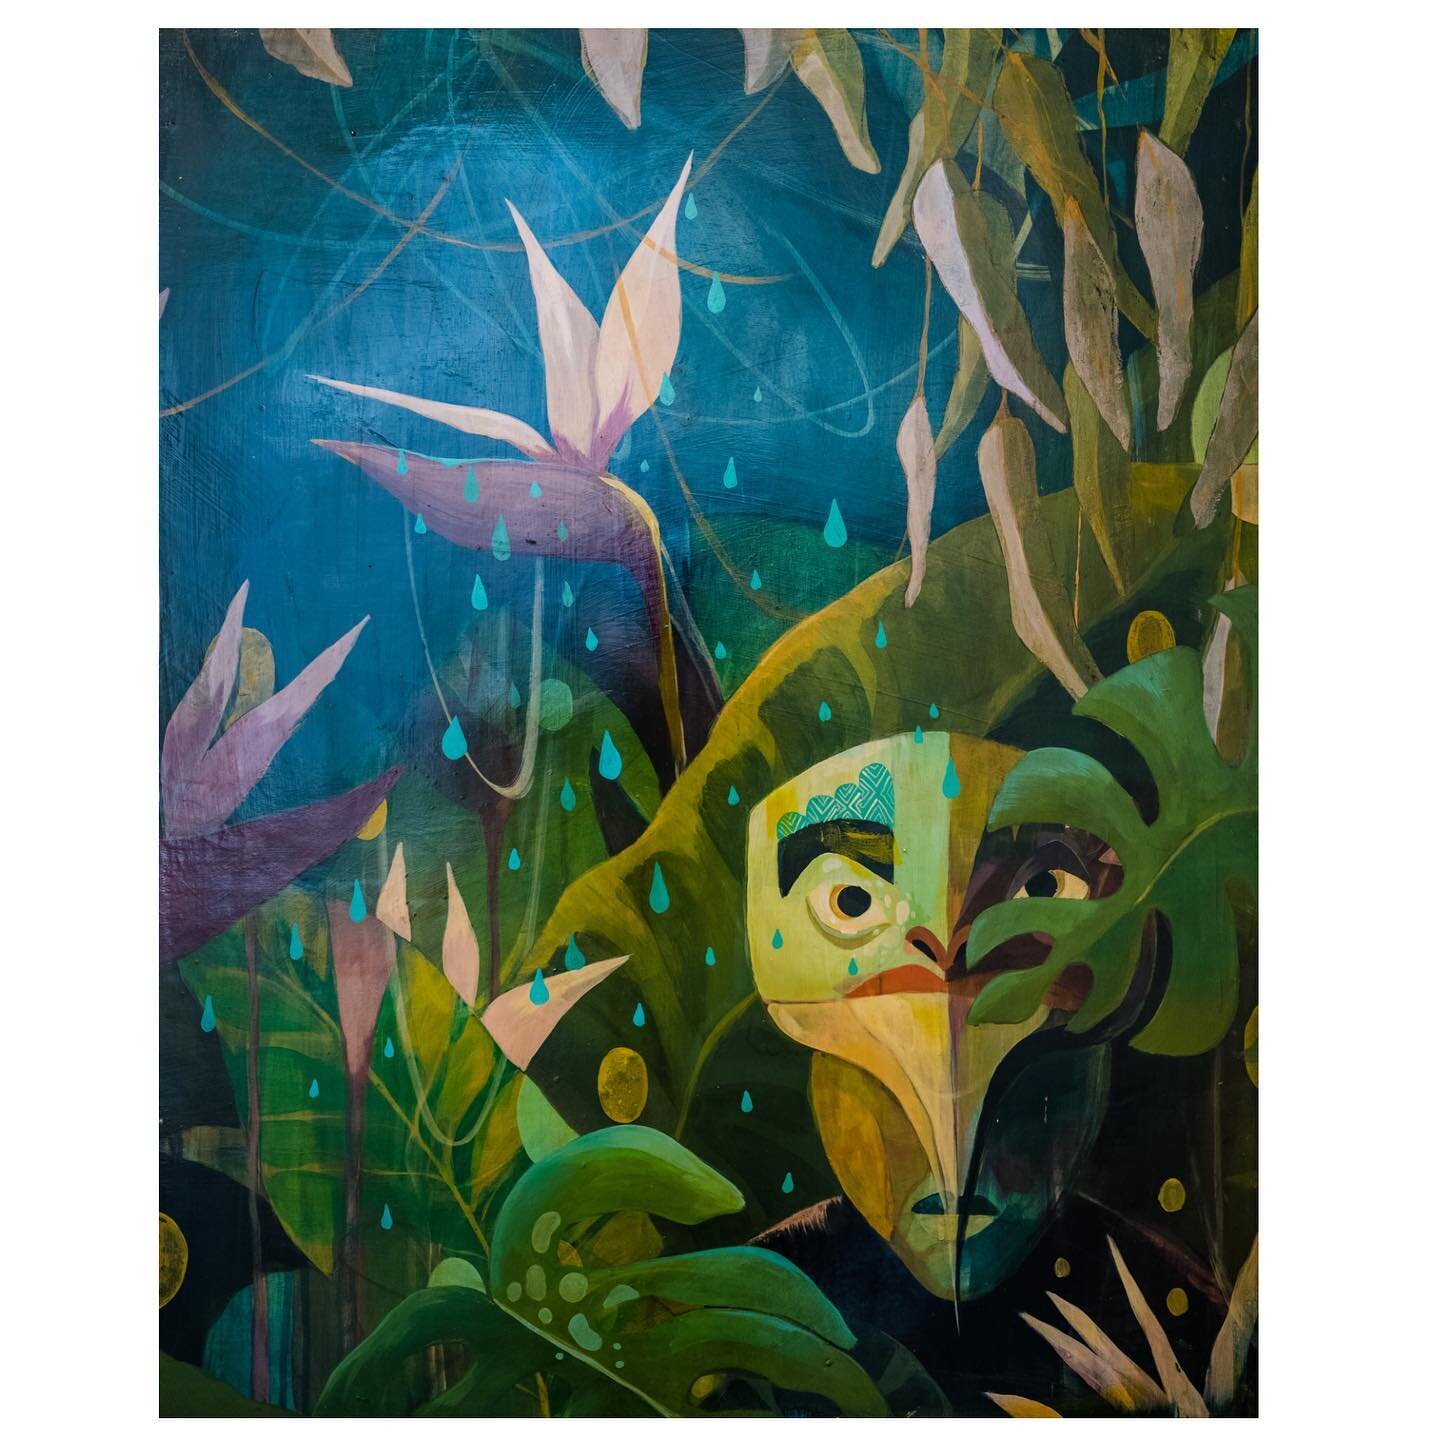 EMERGING&hellip; inspired by eastern philosophy this painting tells the story of the emerging self , our relationship to nature and her cycles. 
In the piece the traditional lotus flower rising from the mud has been reimagined as the Black Bird of Pa